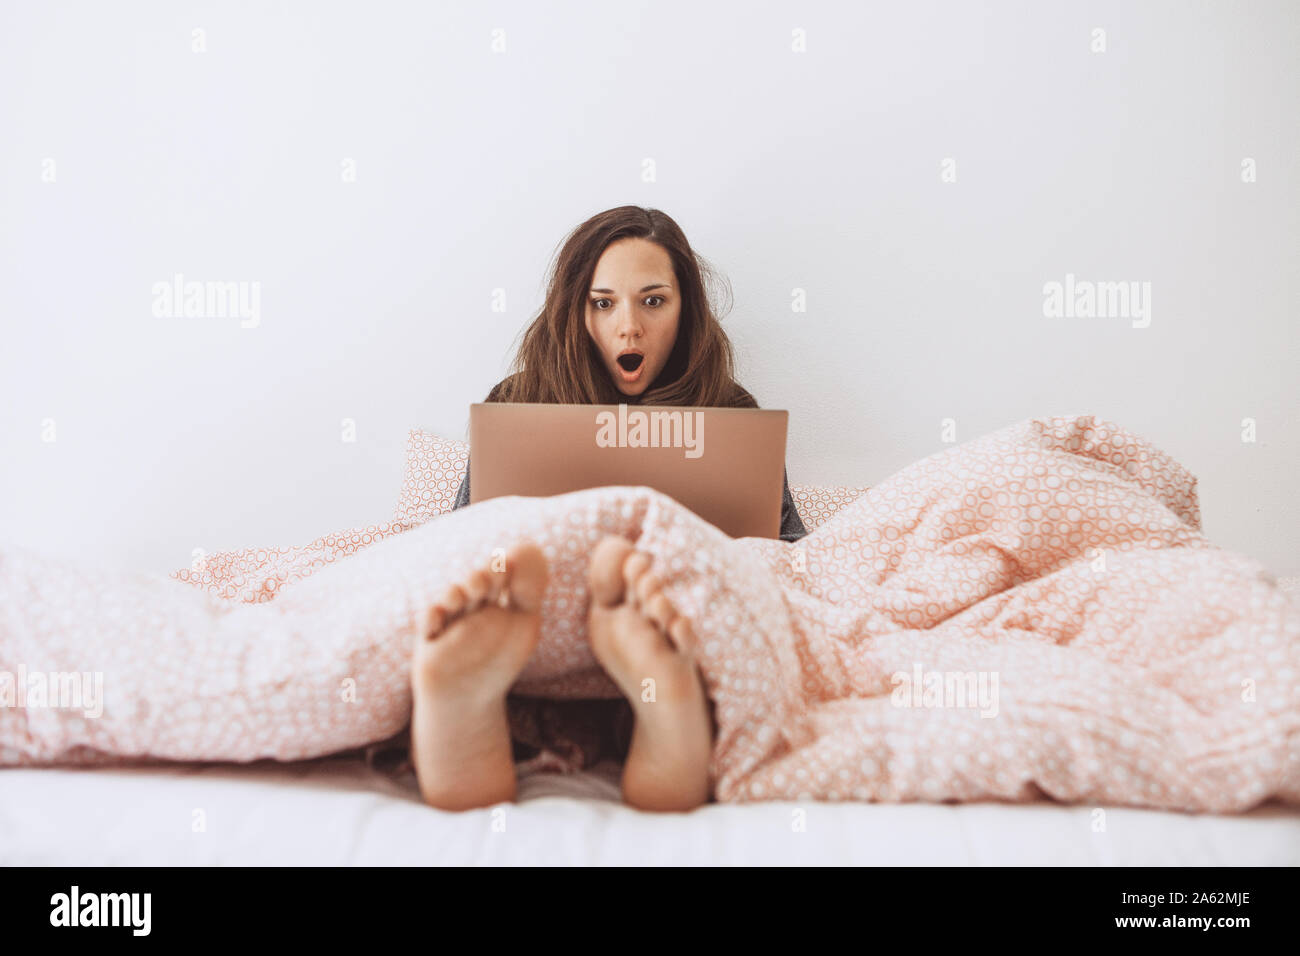 The girl uses the computer in bed. She saw something and was surprised or shocked. Stock Photo